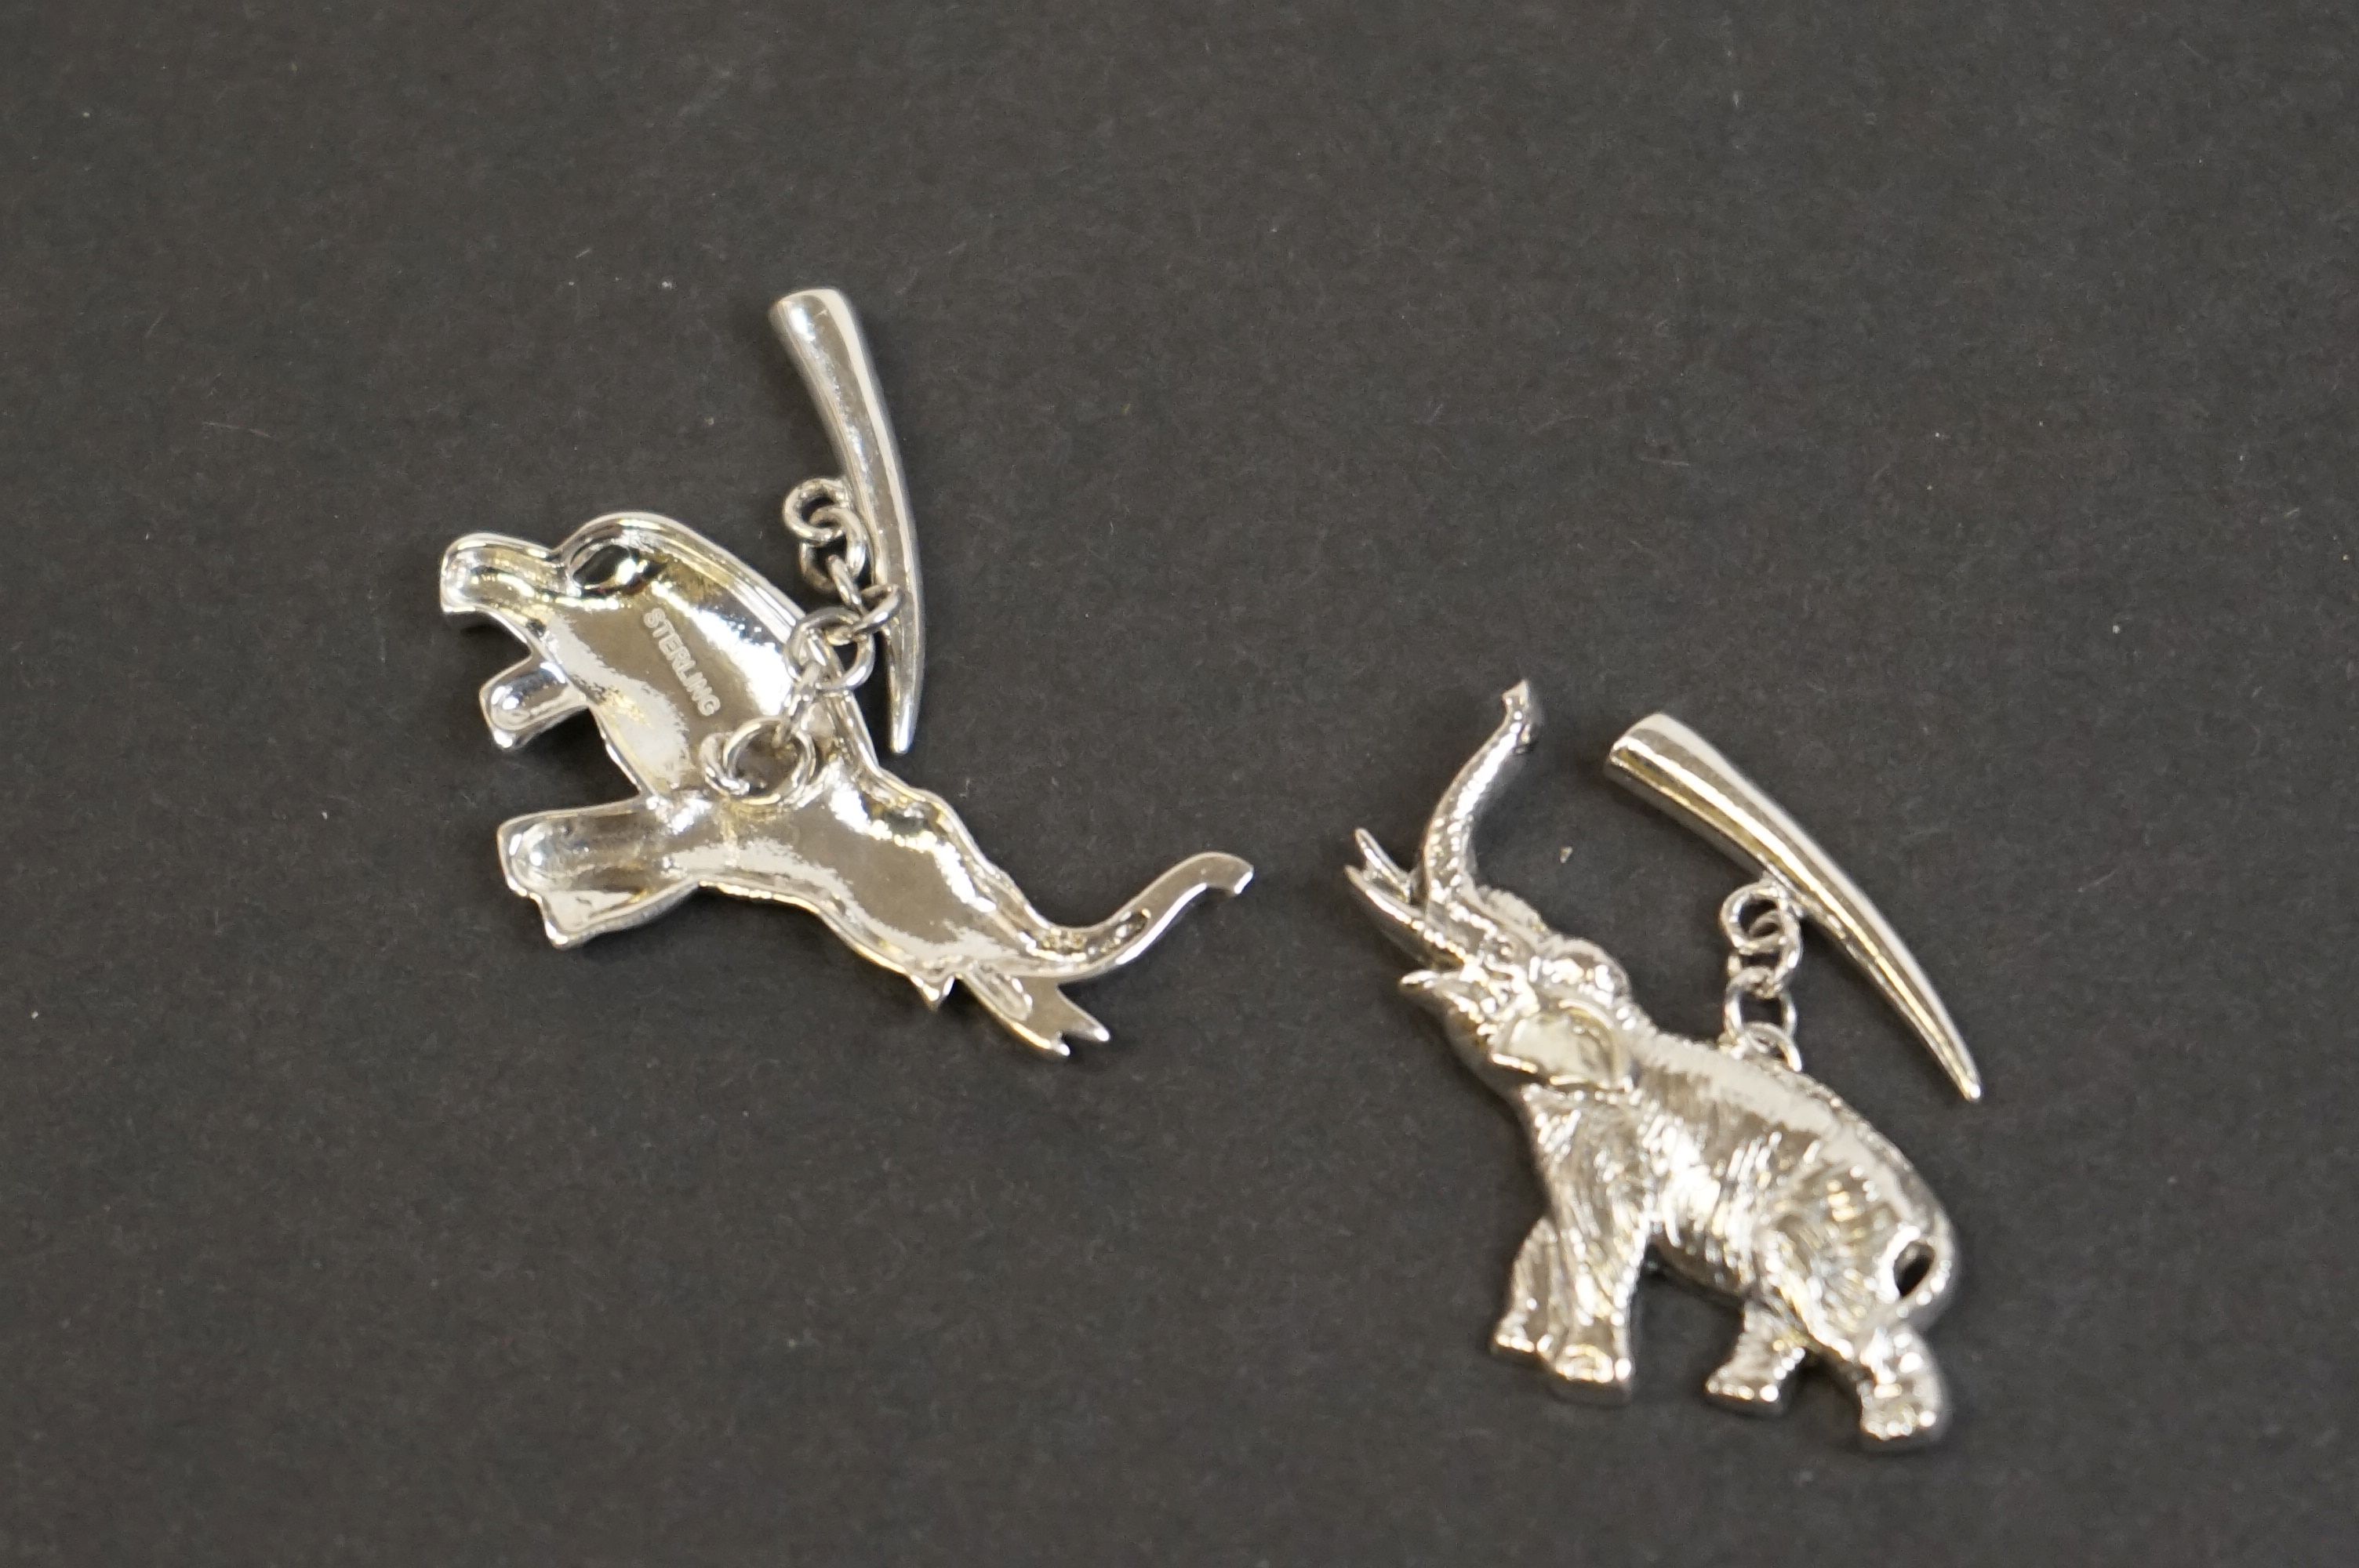 Pair of silver elephant cufflinks - Image 2 of 3